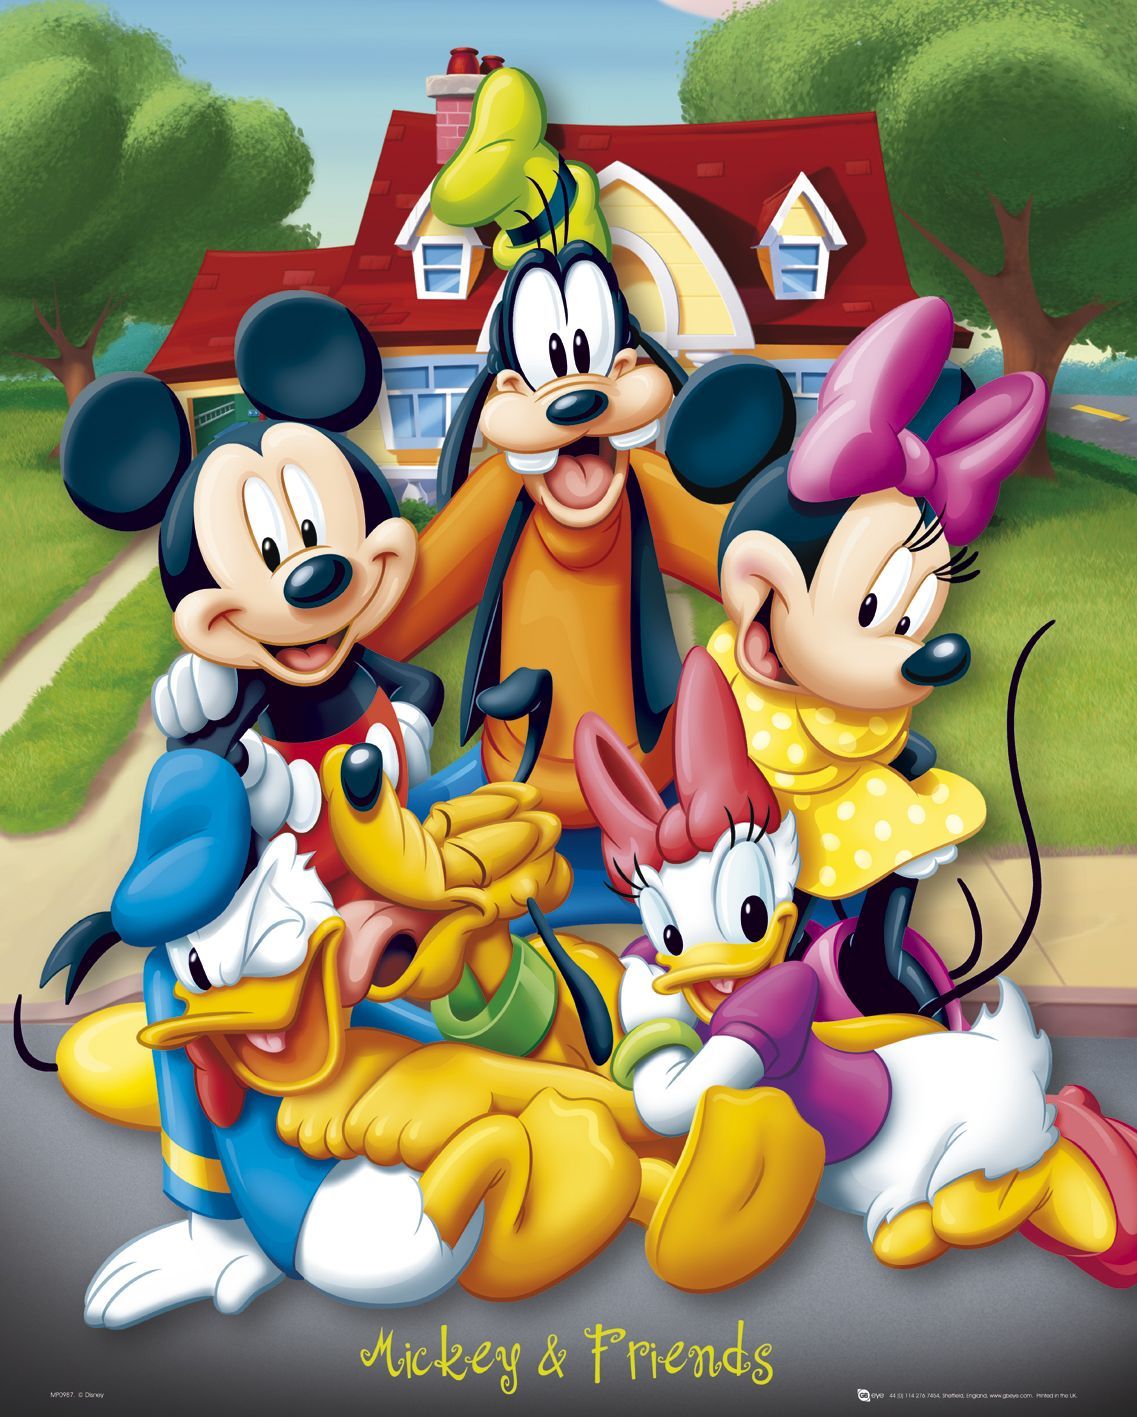 Mickey Mouse And Friends wallpaper, Cartoon, HQ Mickey Mouse And Friends pictureK Wallpaper 2019